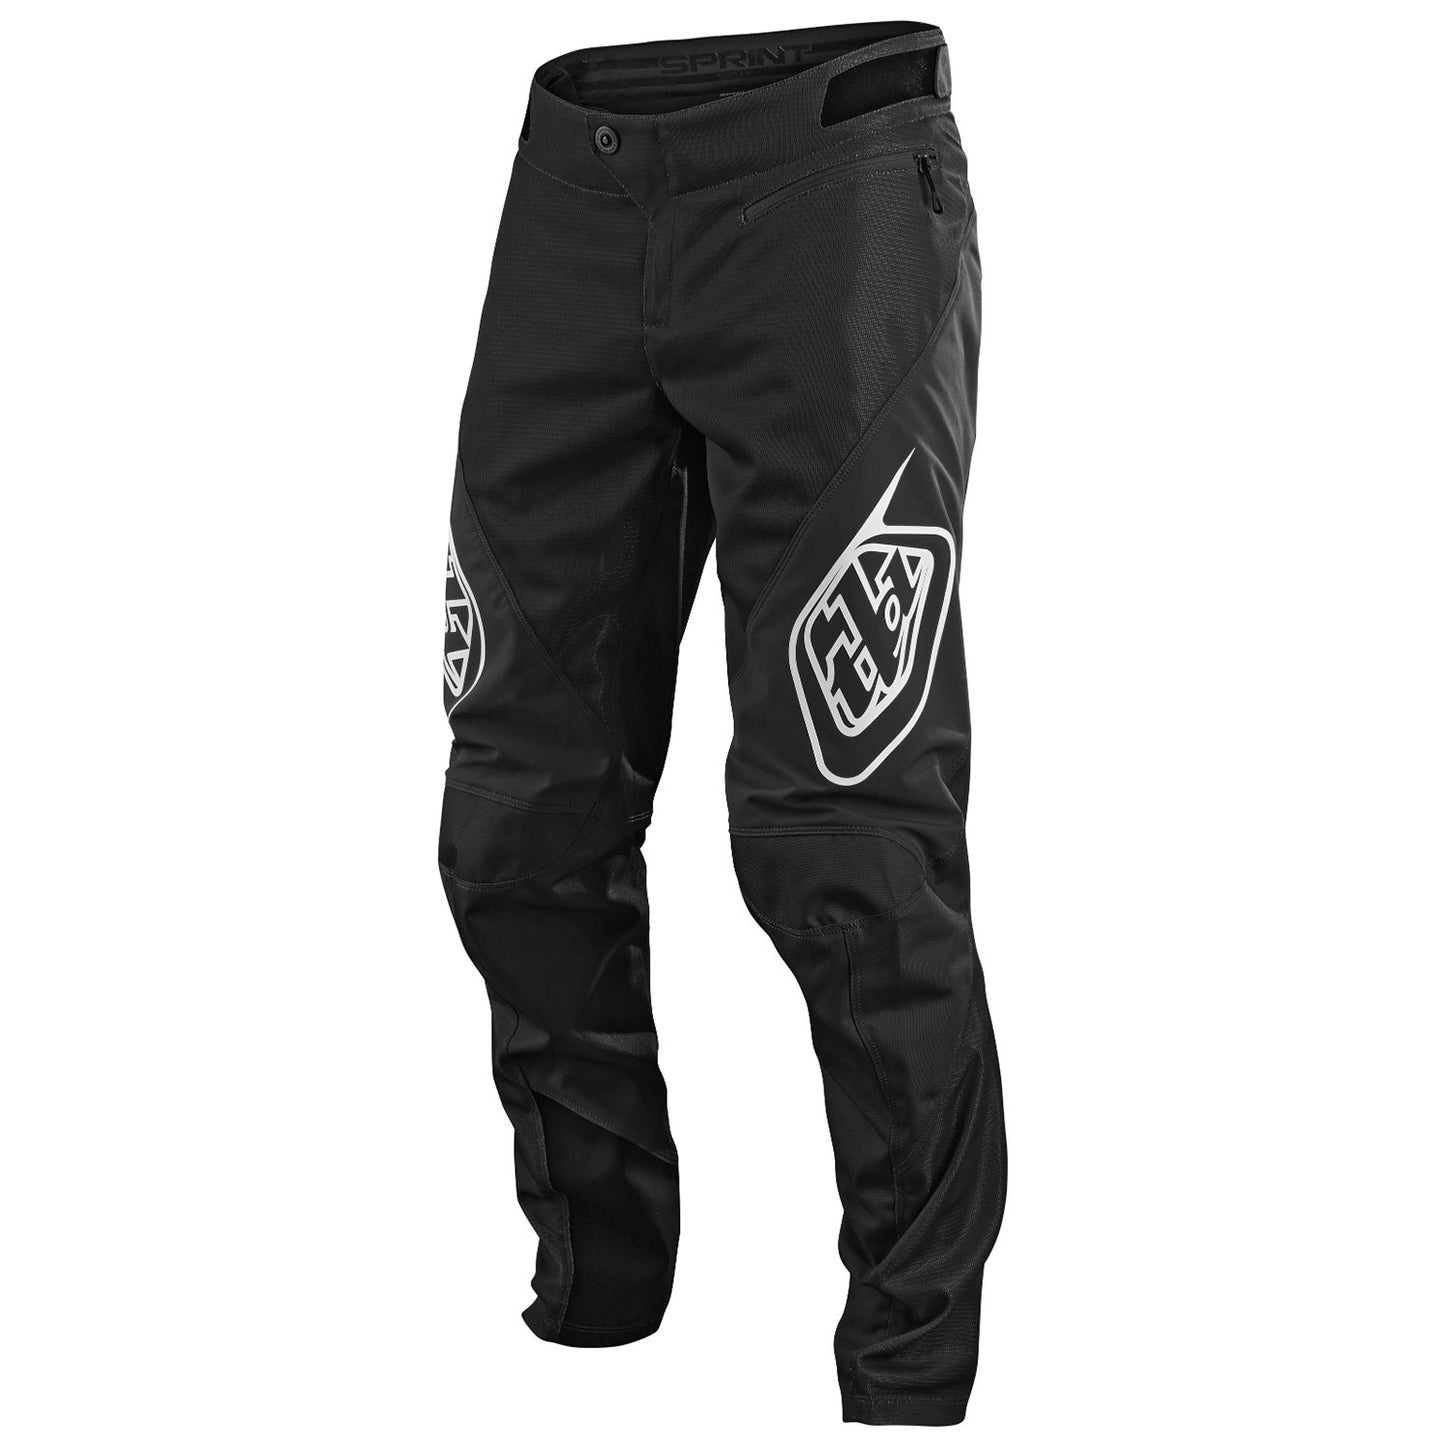 TLD Sprint Youth Pants - Youth 2XS-18 - Black